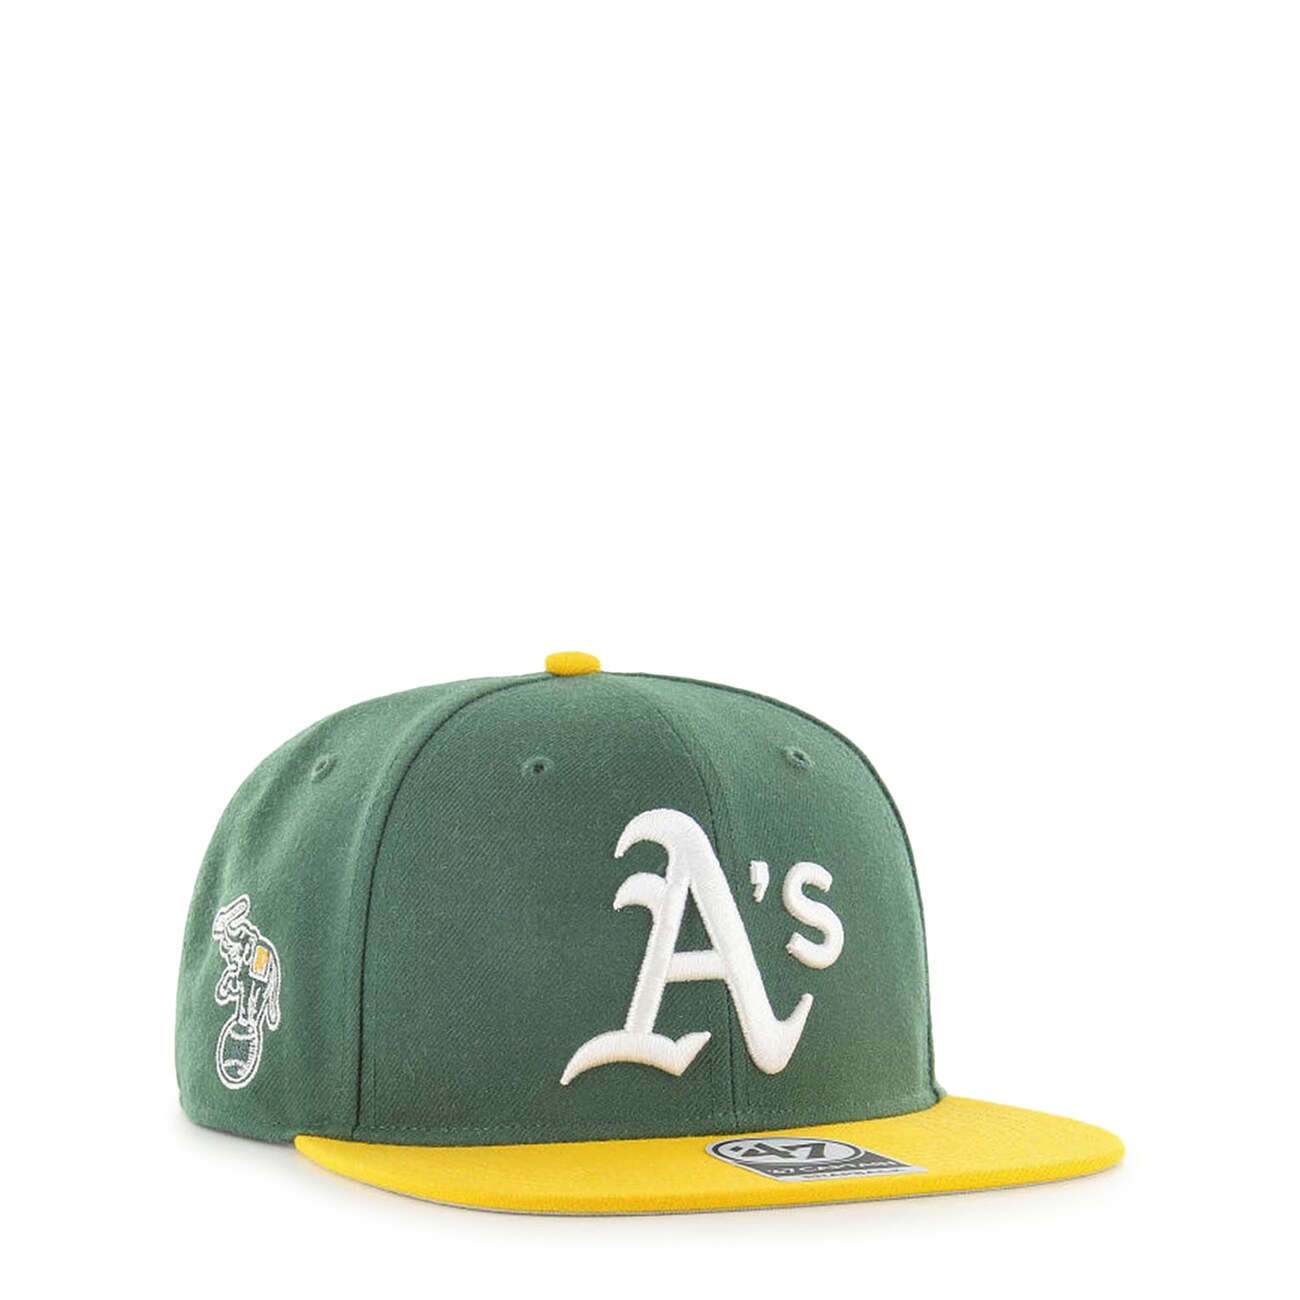 Get Green and Yellow colors to support the Oakland A's!